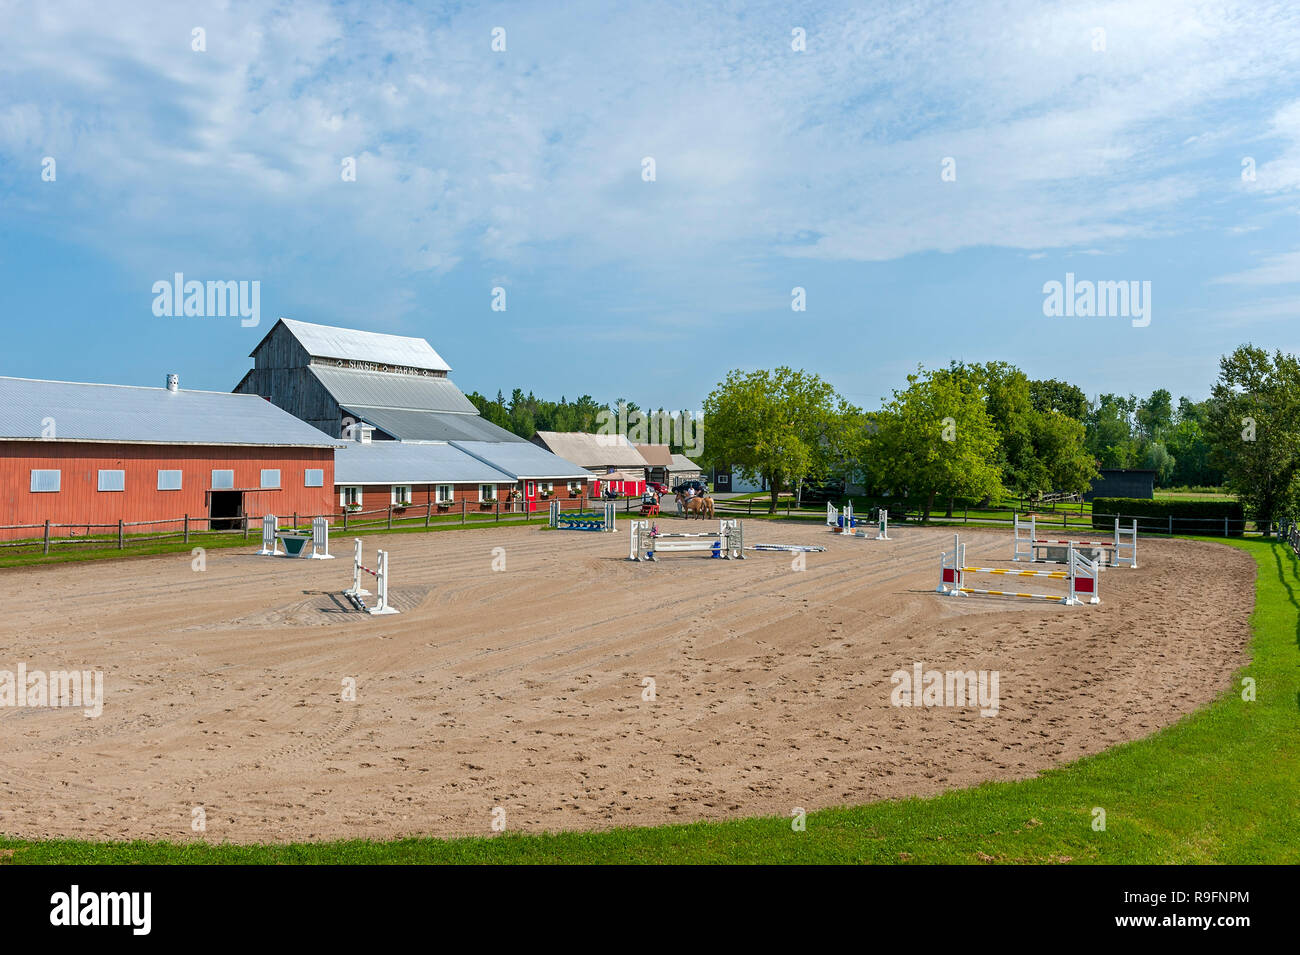 Practice yard for equestrian events Stock Photo